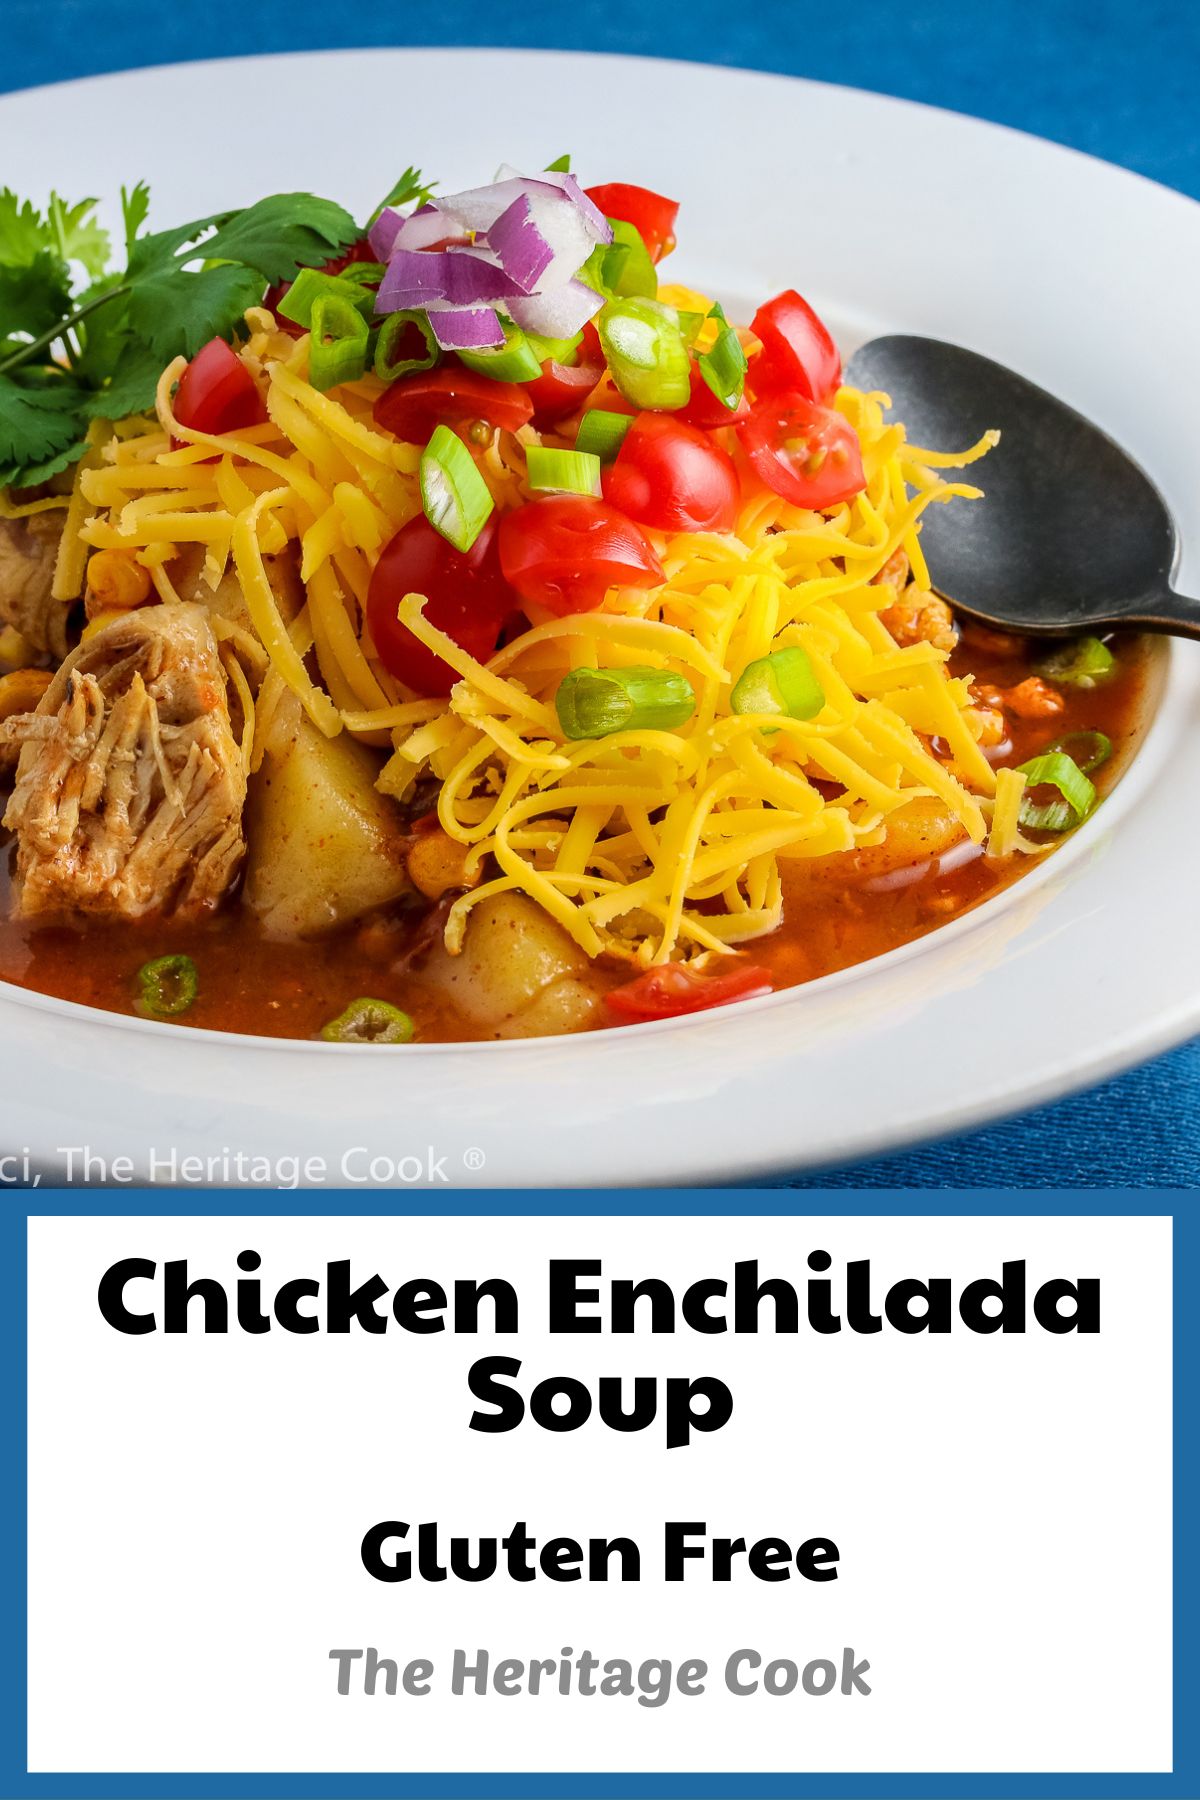 Deep red soup topped with a mountain of ingredients, grated cheese, tomatoes, cilantro, red and green onions, and more; Instant Pot Chicken Enchilada Soup © 2018 Jane Bonacci, The Heritage Cook. 